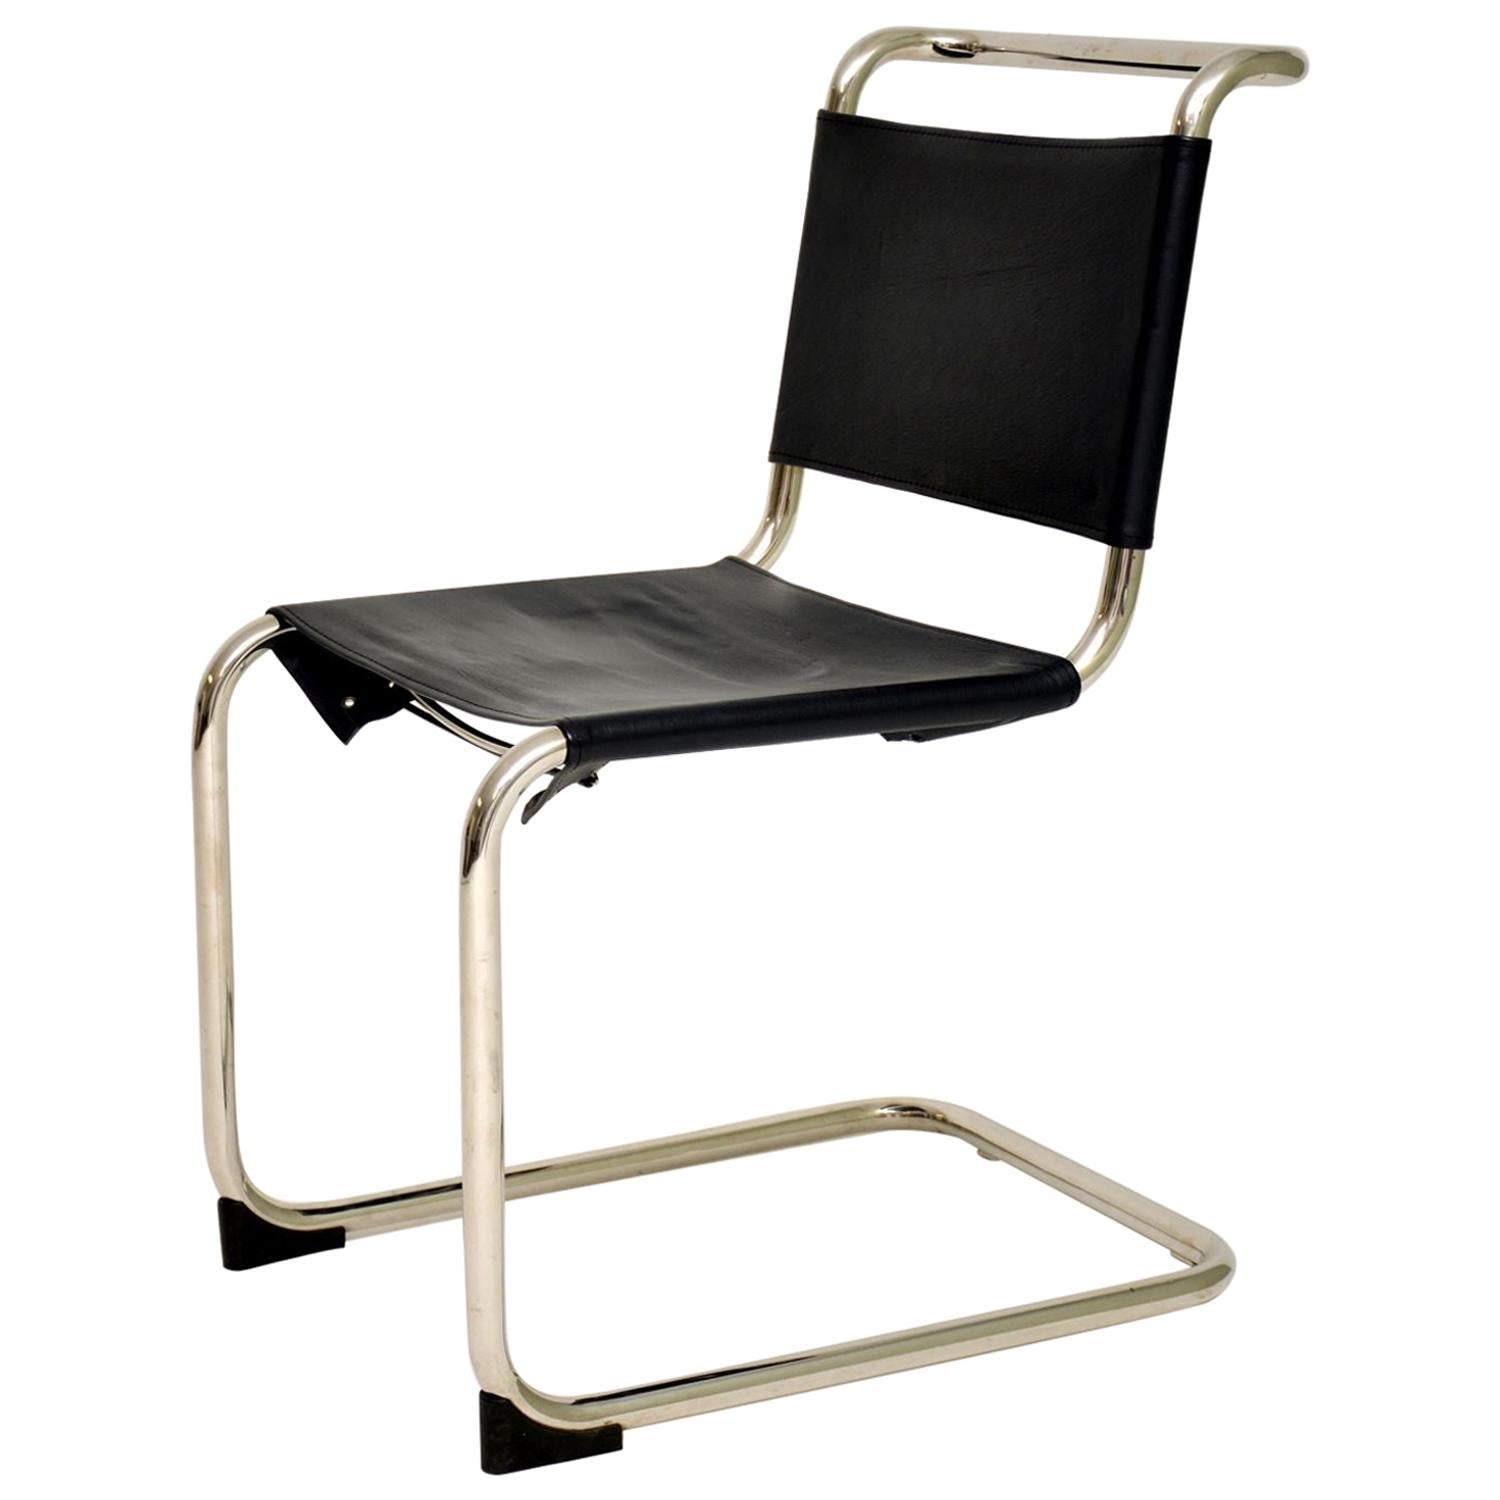 Vintage Steel and Leather Cantilever S33 Chair by Mart Stam